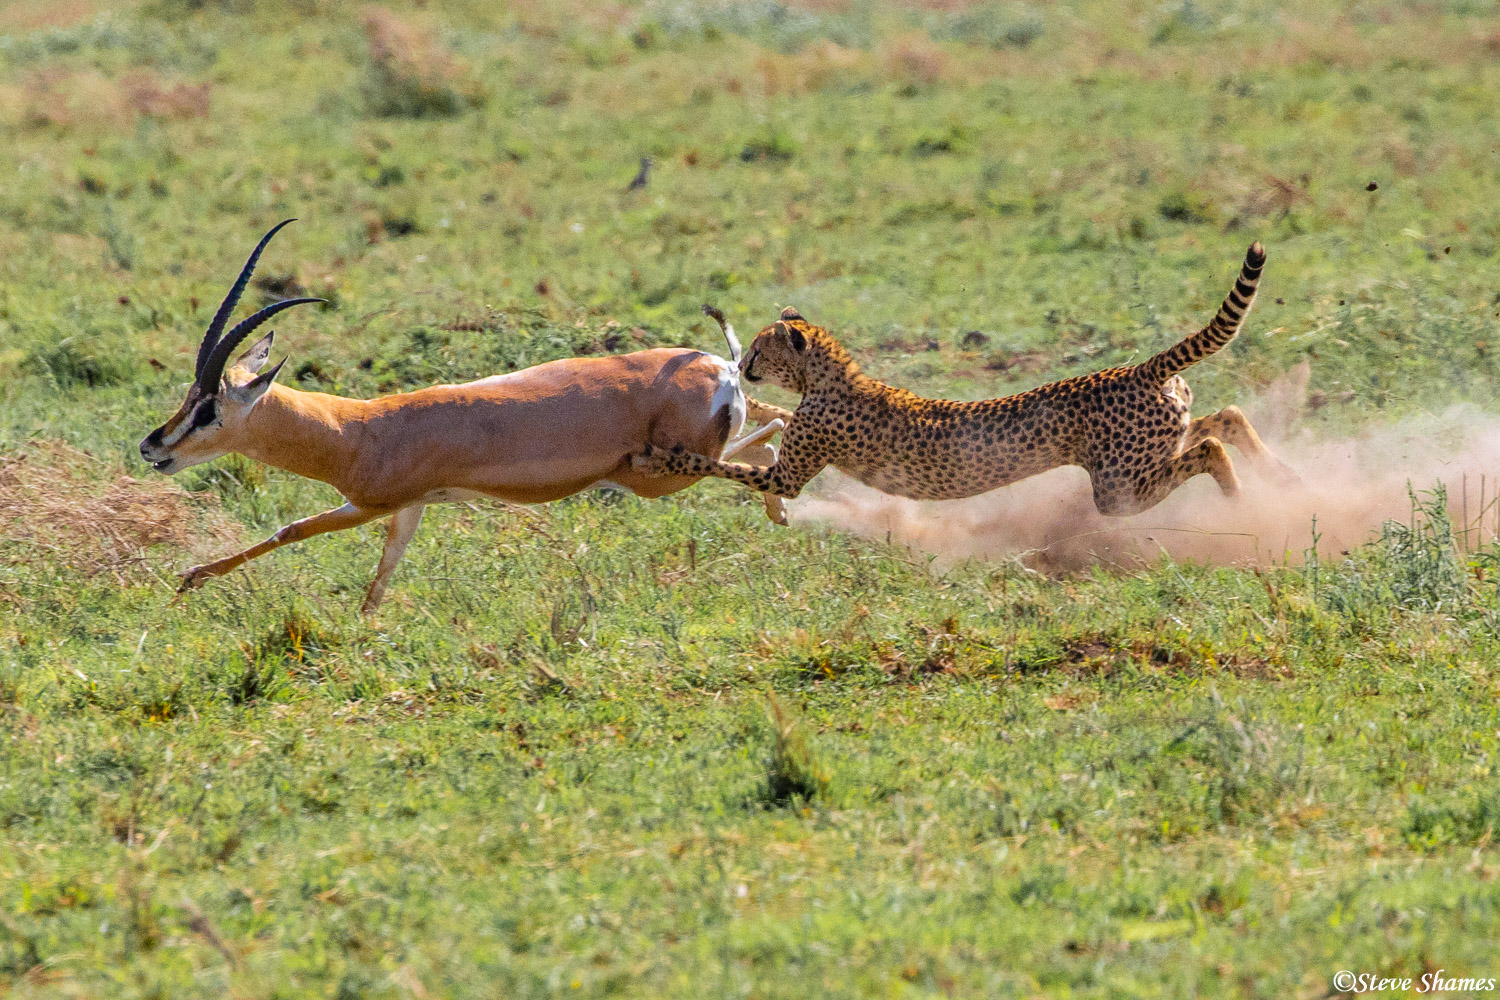 Here is the moment the cheetah catches the grant's gazelle -- for now. They usually bring the animal down by tripping it up.